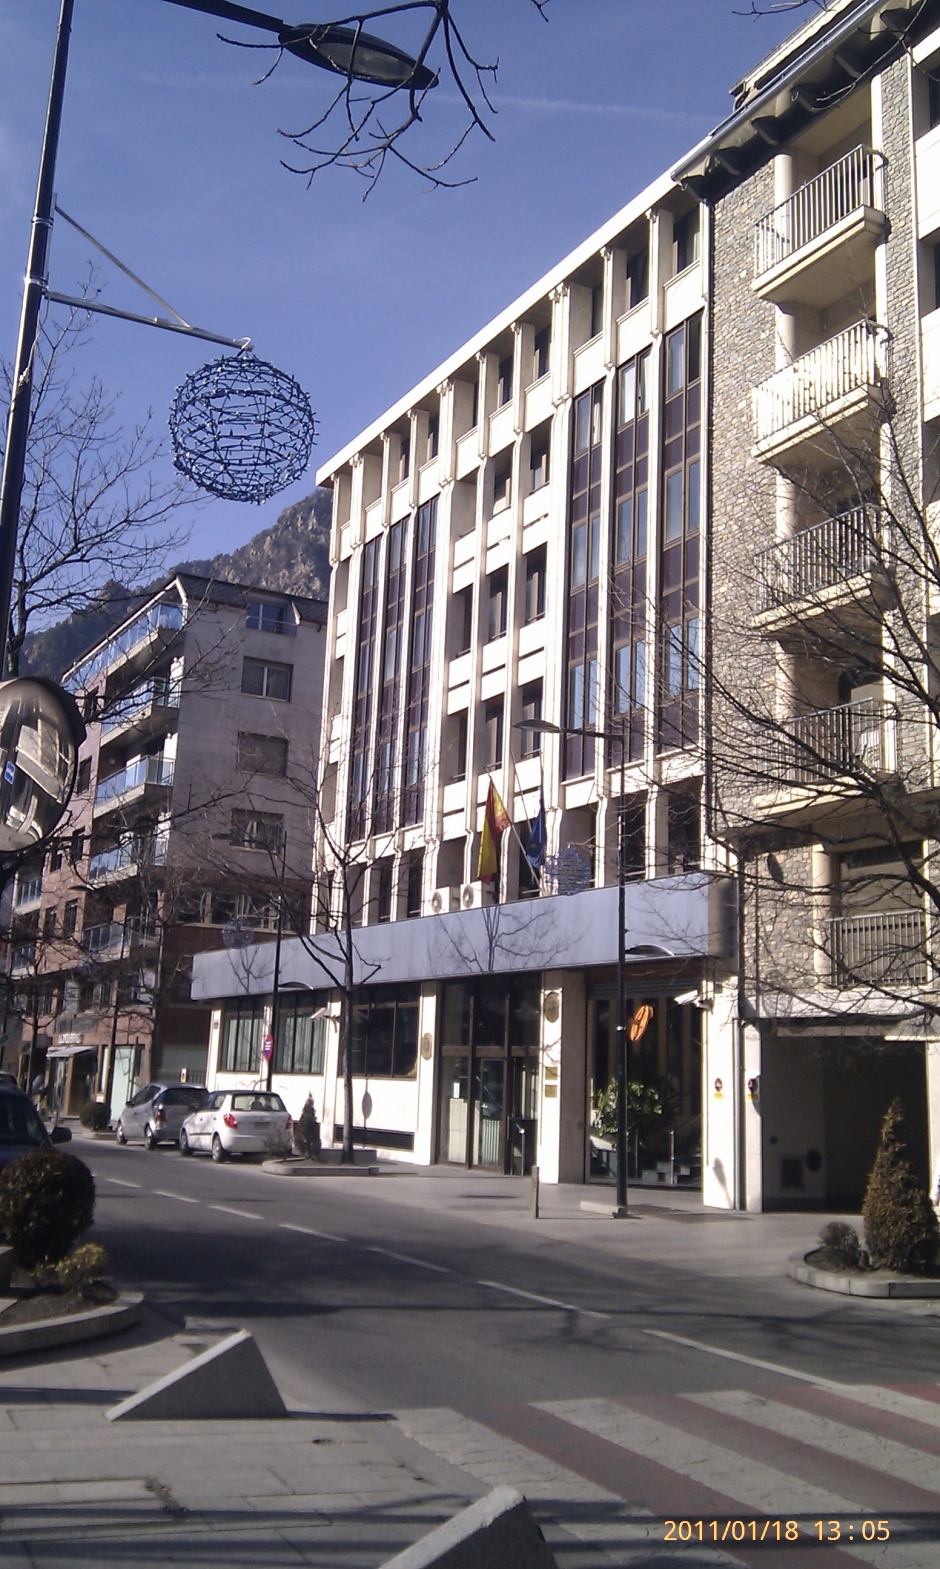 Integral reform of the Headquarters of the Spanish Embassy, Architecture (Principality of Andorra)